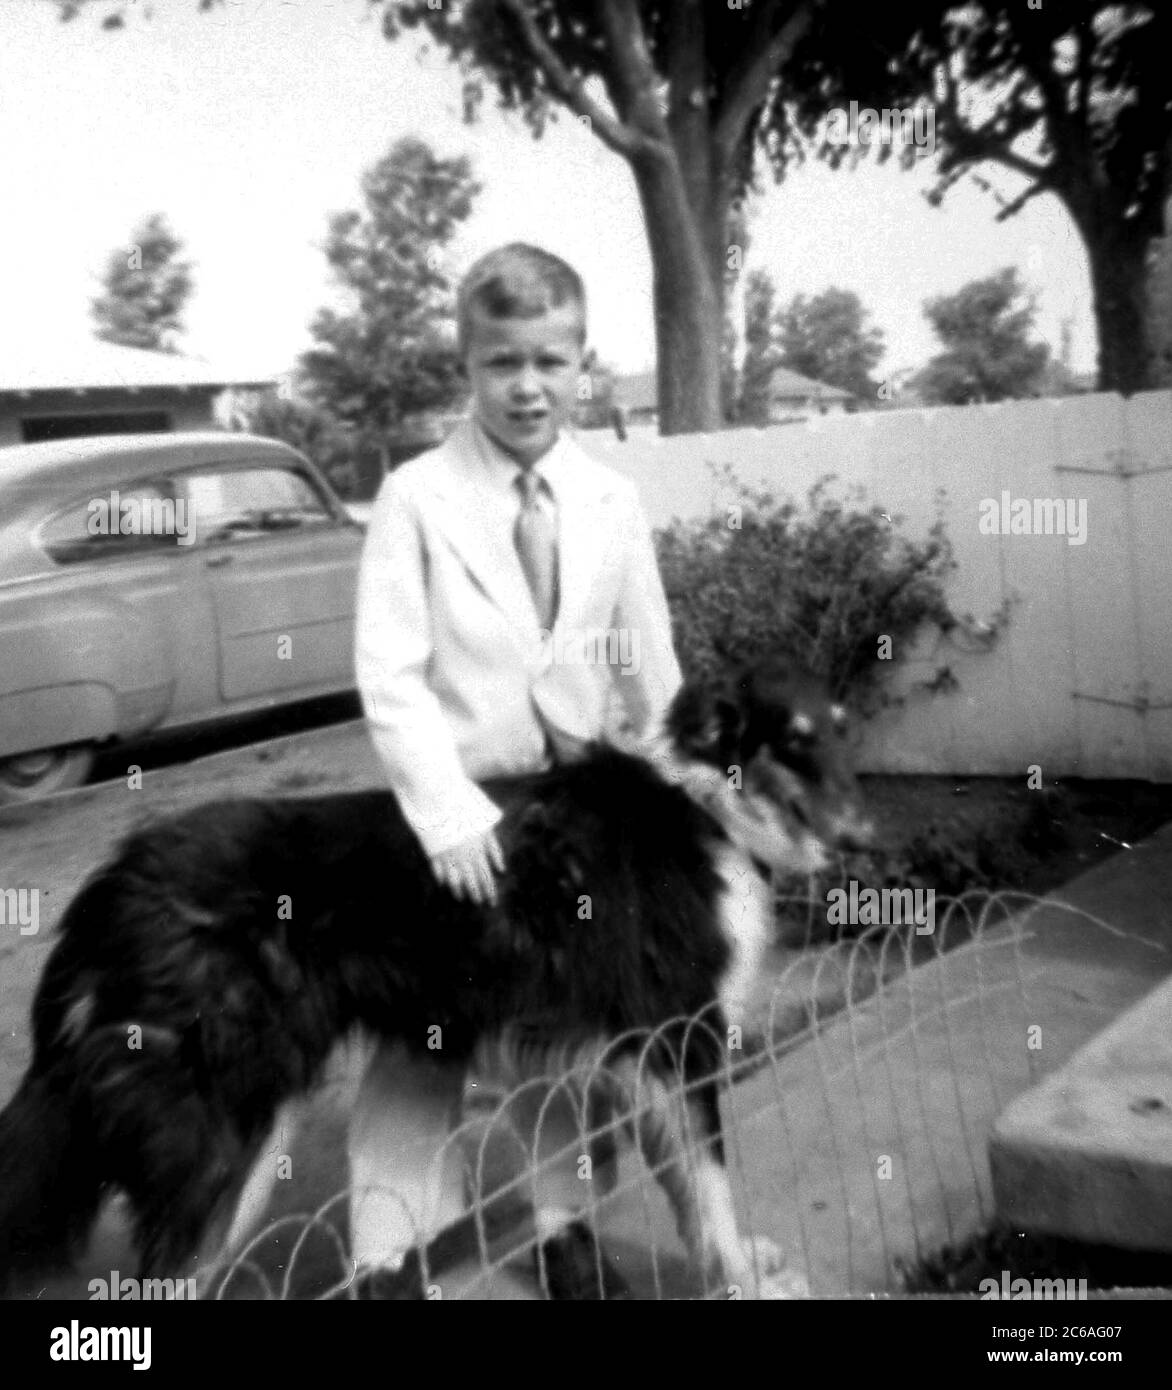 HS576  Seven-year-old George W. Bush with his dog in Midland, Texas USA, 11 February 1954. Photo credit: George Bush Presidential Library Stock Photo